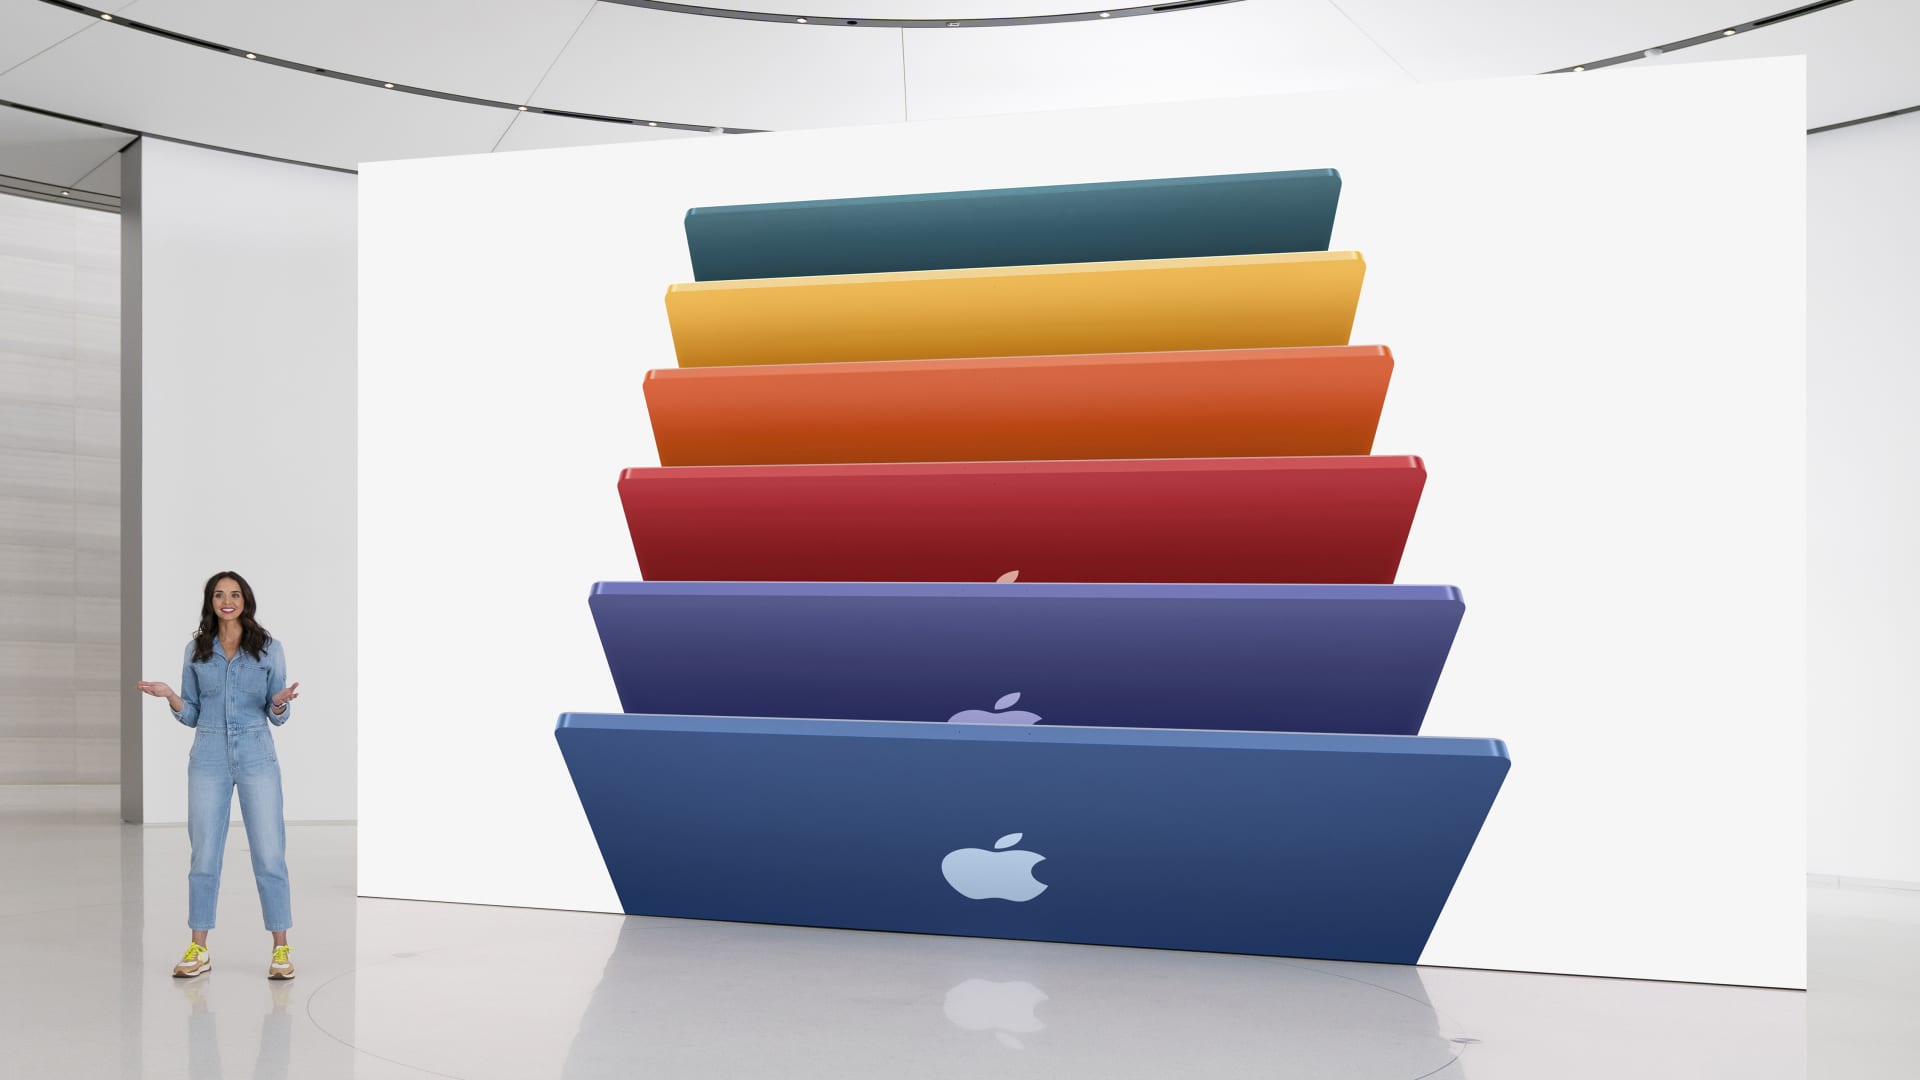 Apple launches new iMac with new colors.